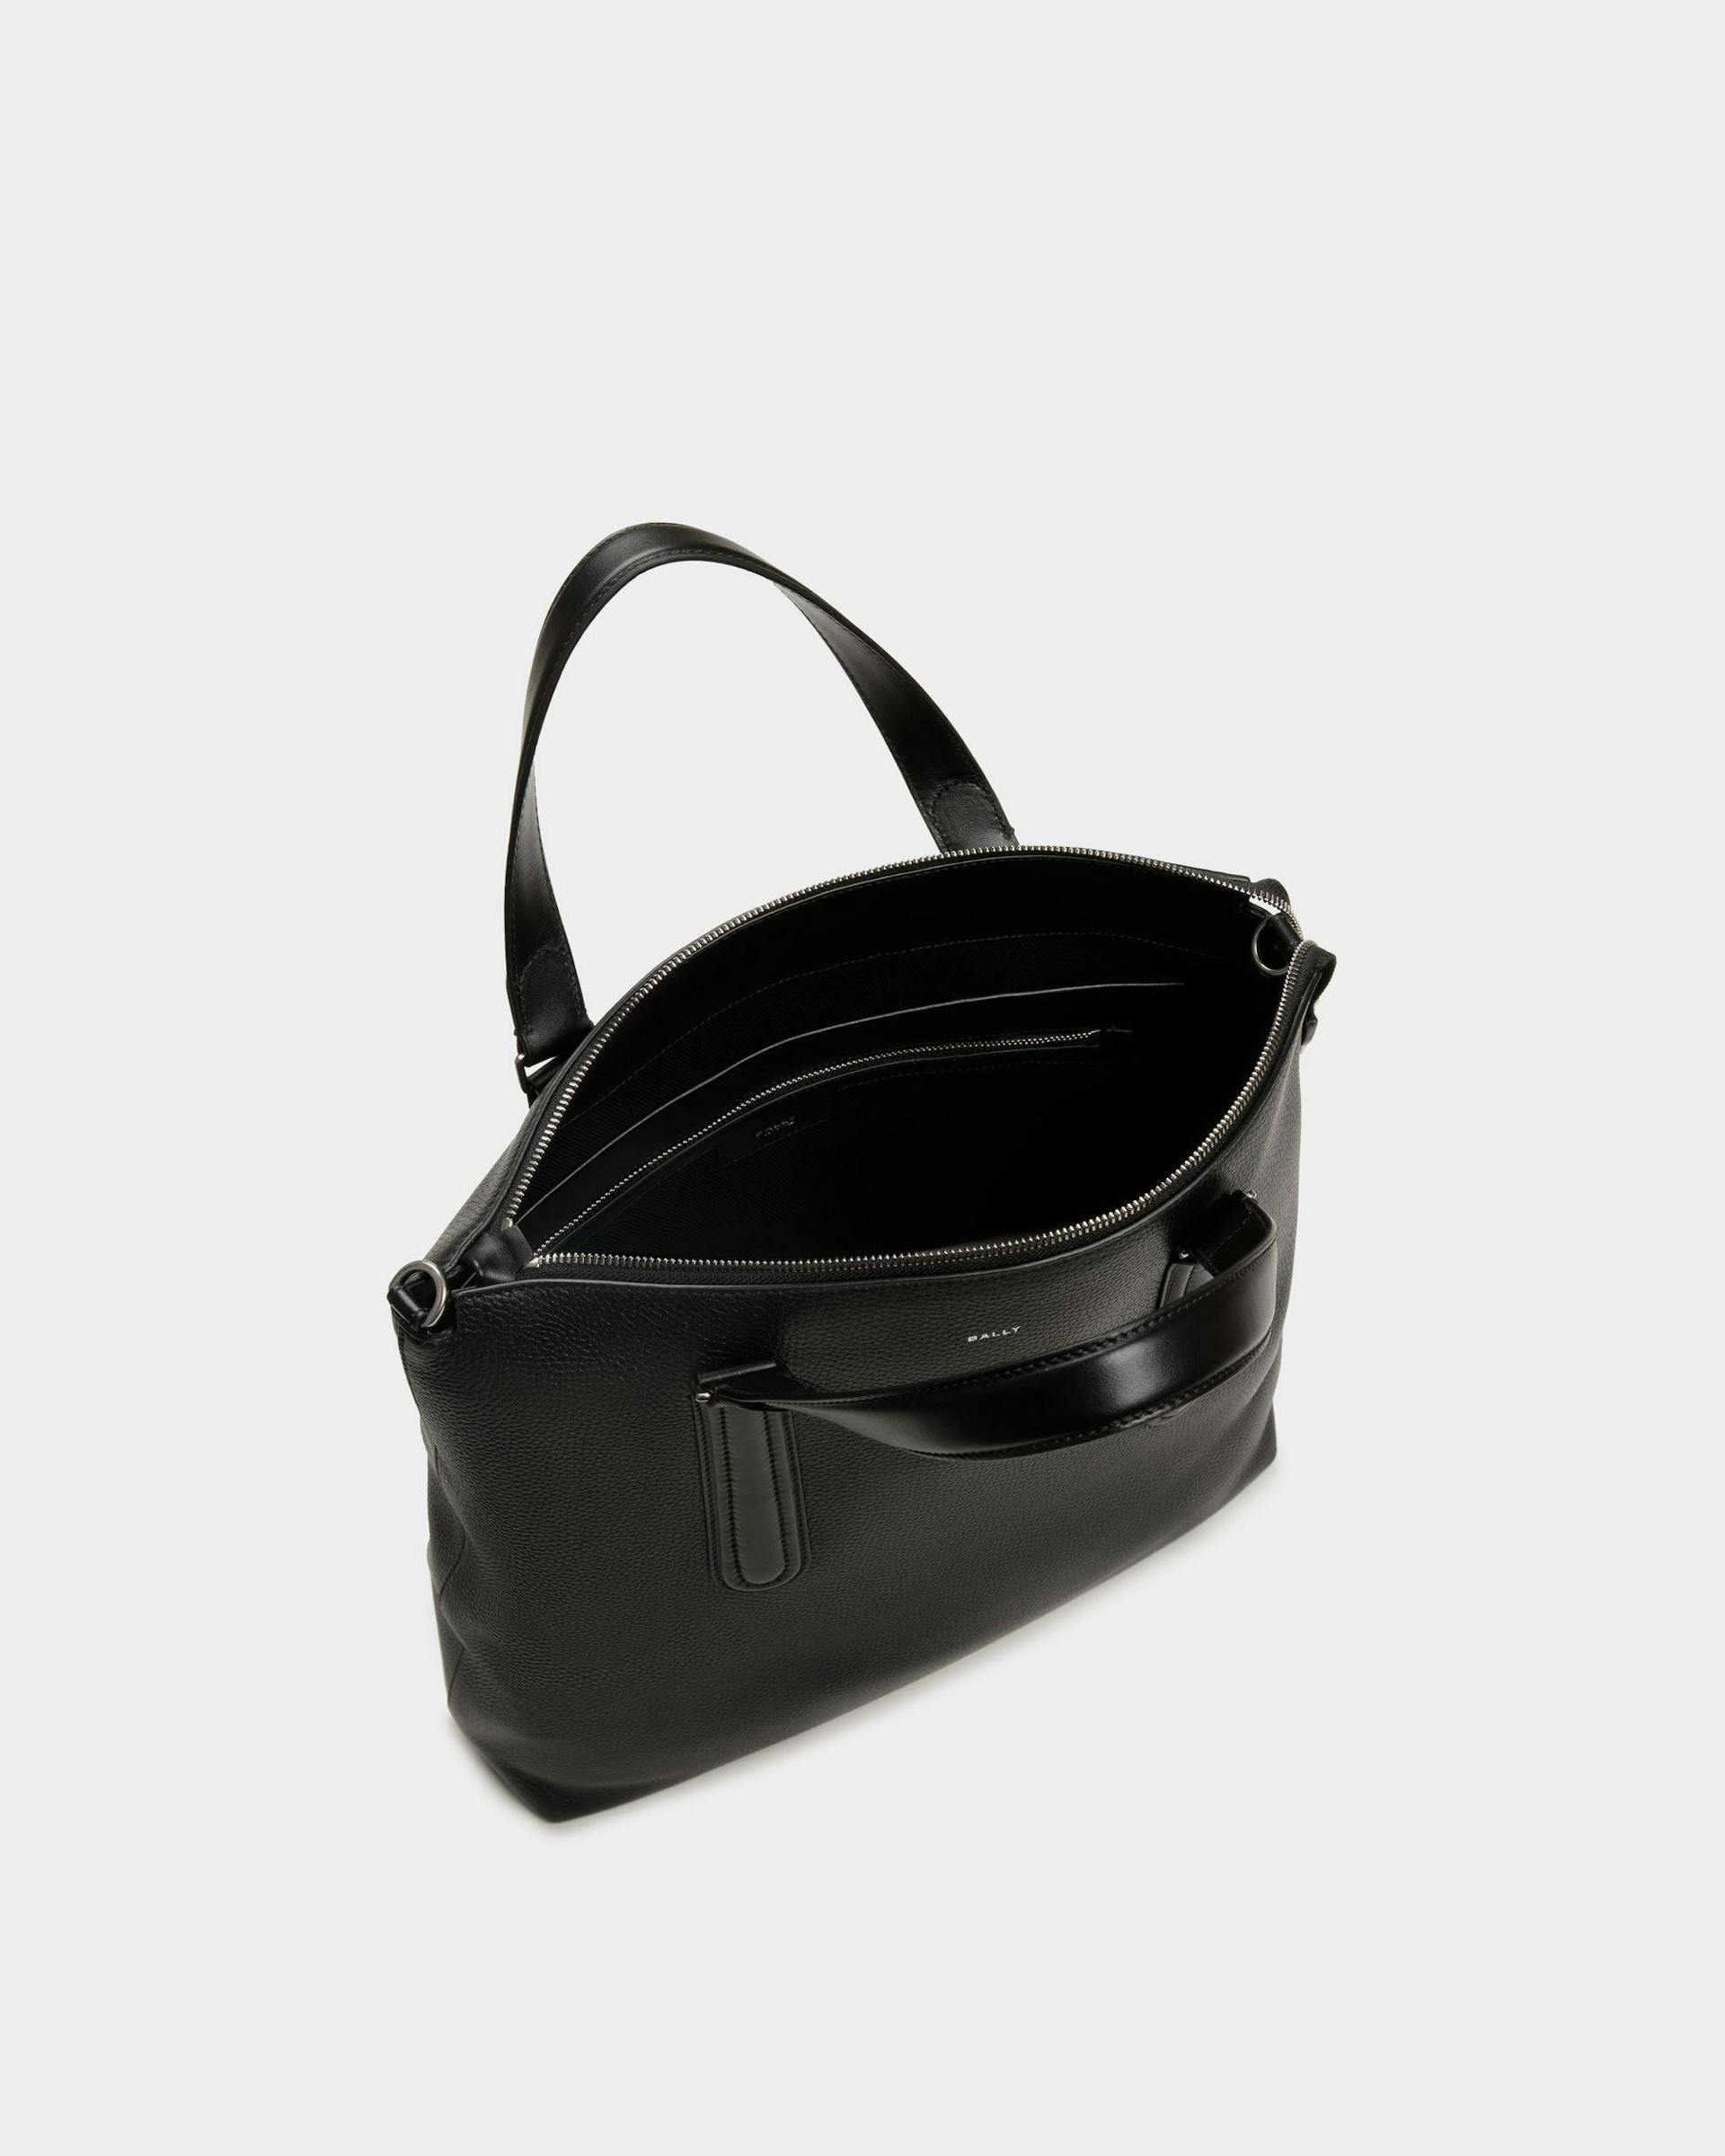 Men's Spin Tote in Black Grained Leather | Bally | Still Life Open / Inside